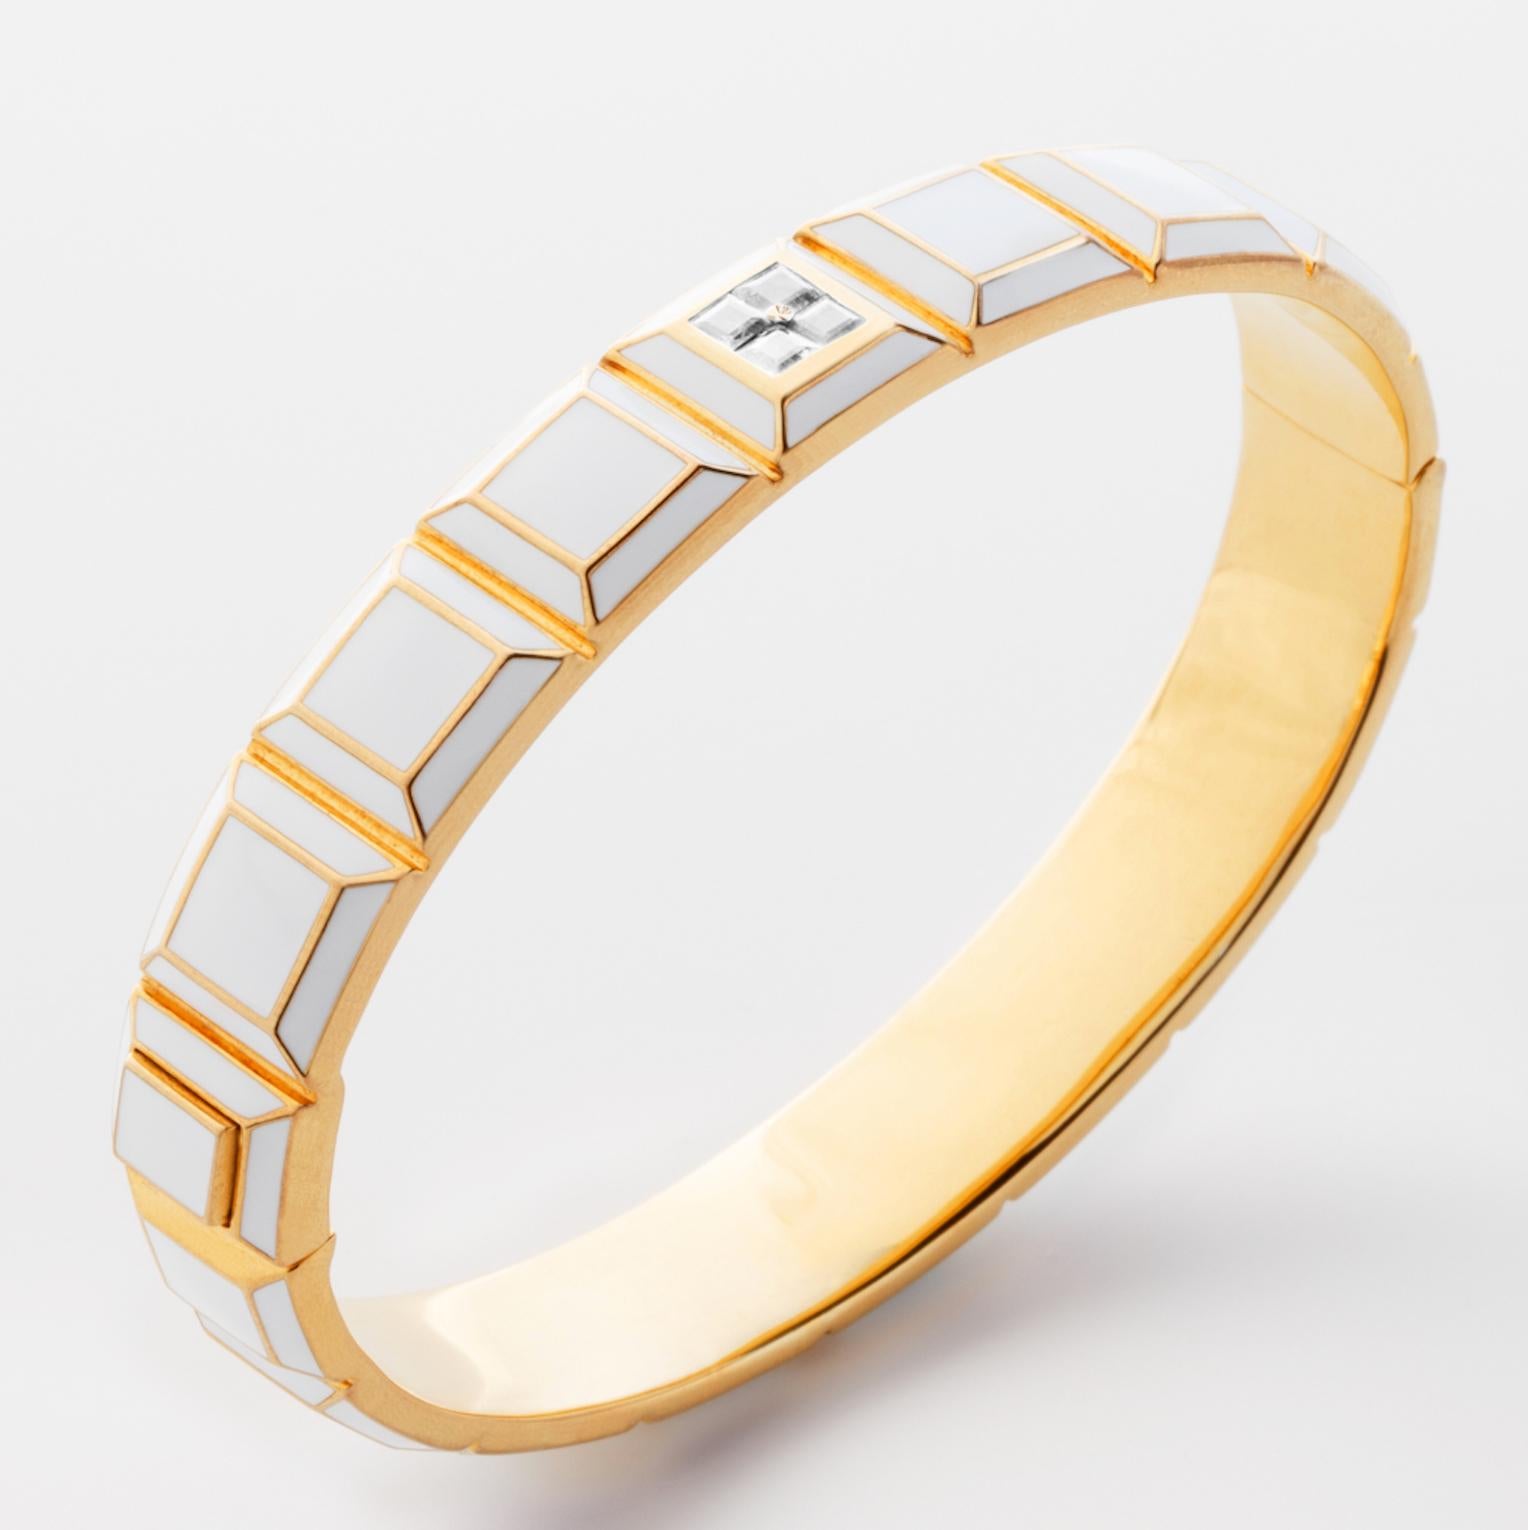 Gold-Plated Enamel Carousel Bracelet features a Yellow Gold-Plated Silver bracelet with white enamel and white sapphires, along with a clasp closure that secures the bracelet onto the wearer's wrist. 
Yellow Gold-Plated Silver, White Enamel, White